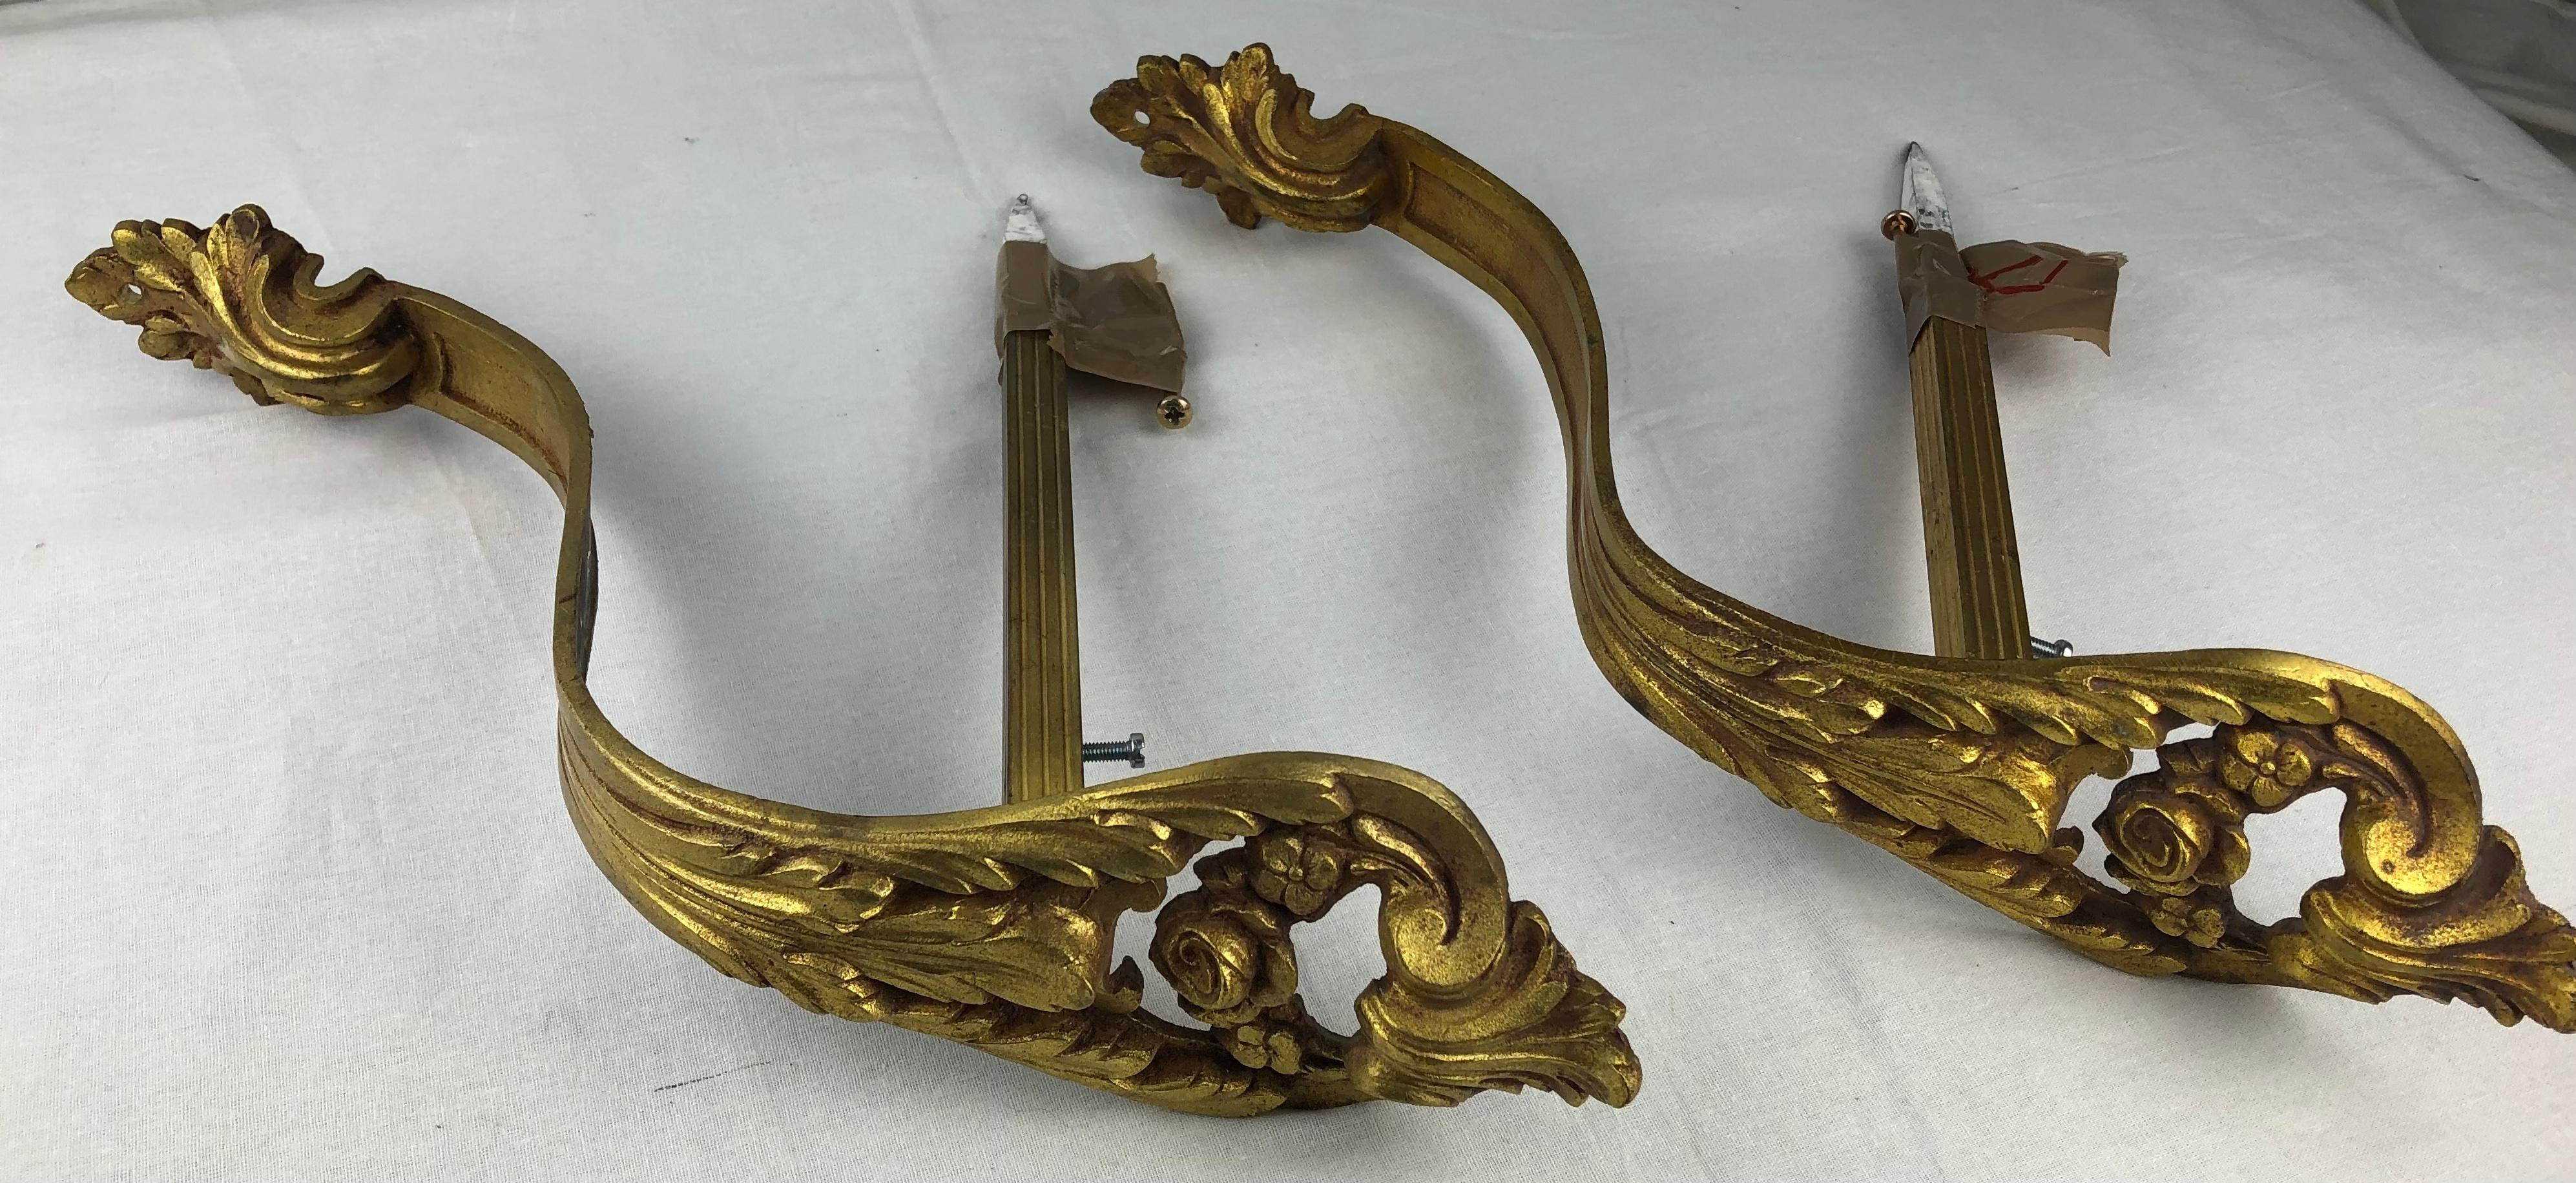 19th Century Set of 5 Louis XV Style French Rococo Gilt Bronze Curtain Rod Supports & Holders